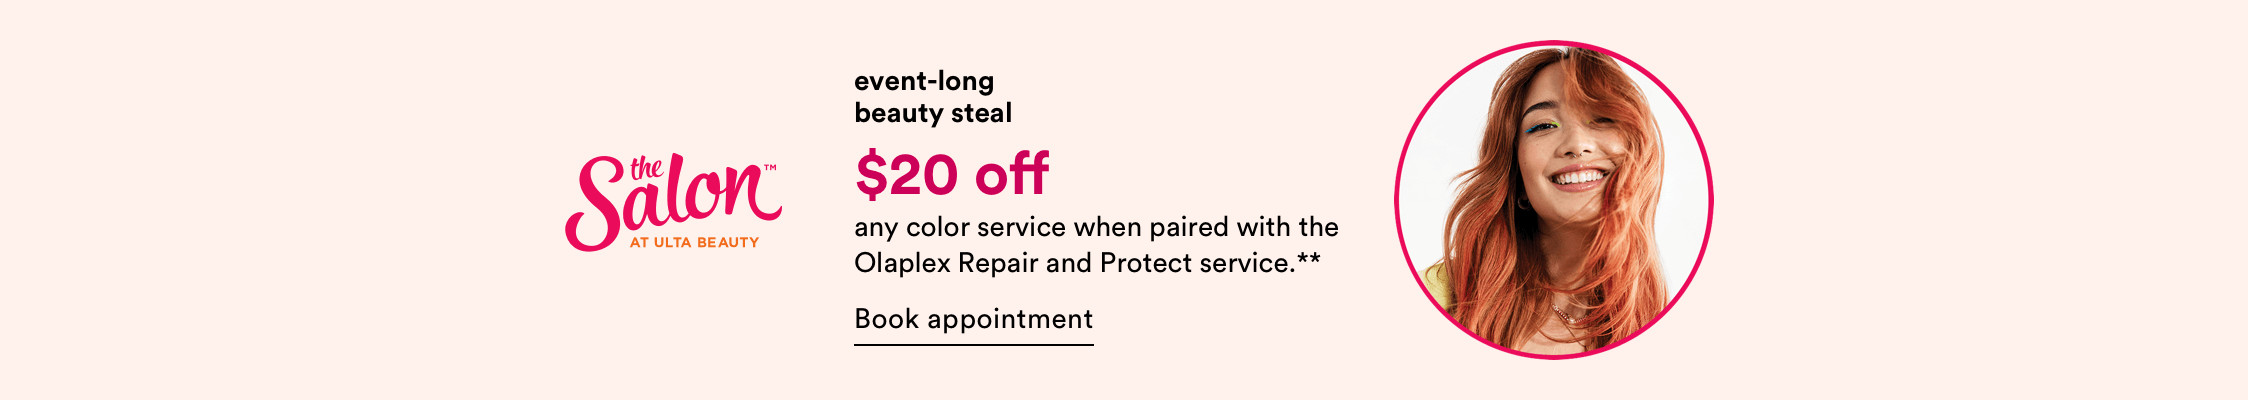 Event-long Beauty Steal - $20 off any color service when paired with the Olaplex Repair and Protect service